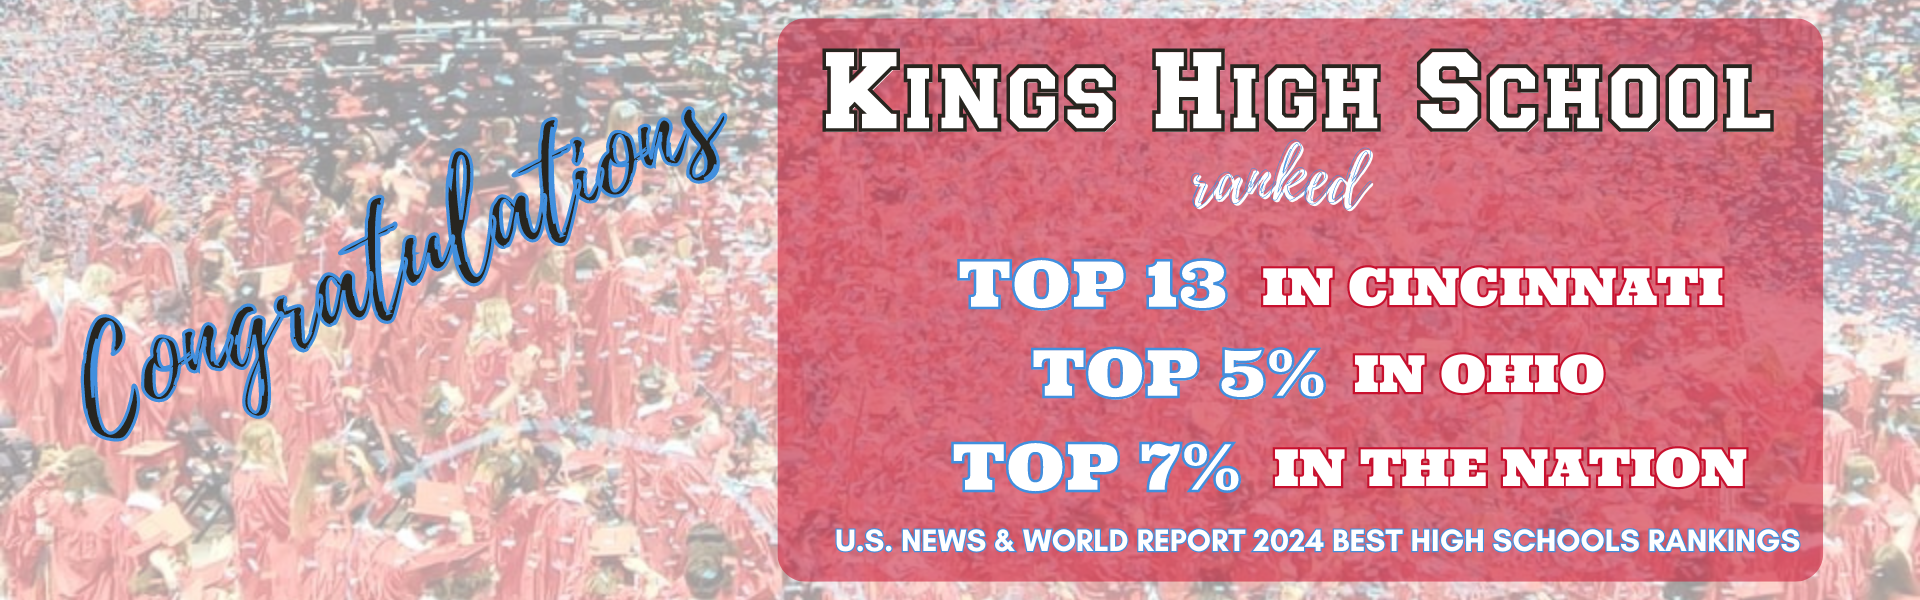 Congratulations Kings High School US News and World Report Best High Schools ranked top 13 in cincinnati, top 5% in Ohio and top 7% in the Nation